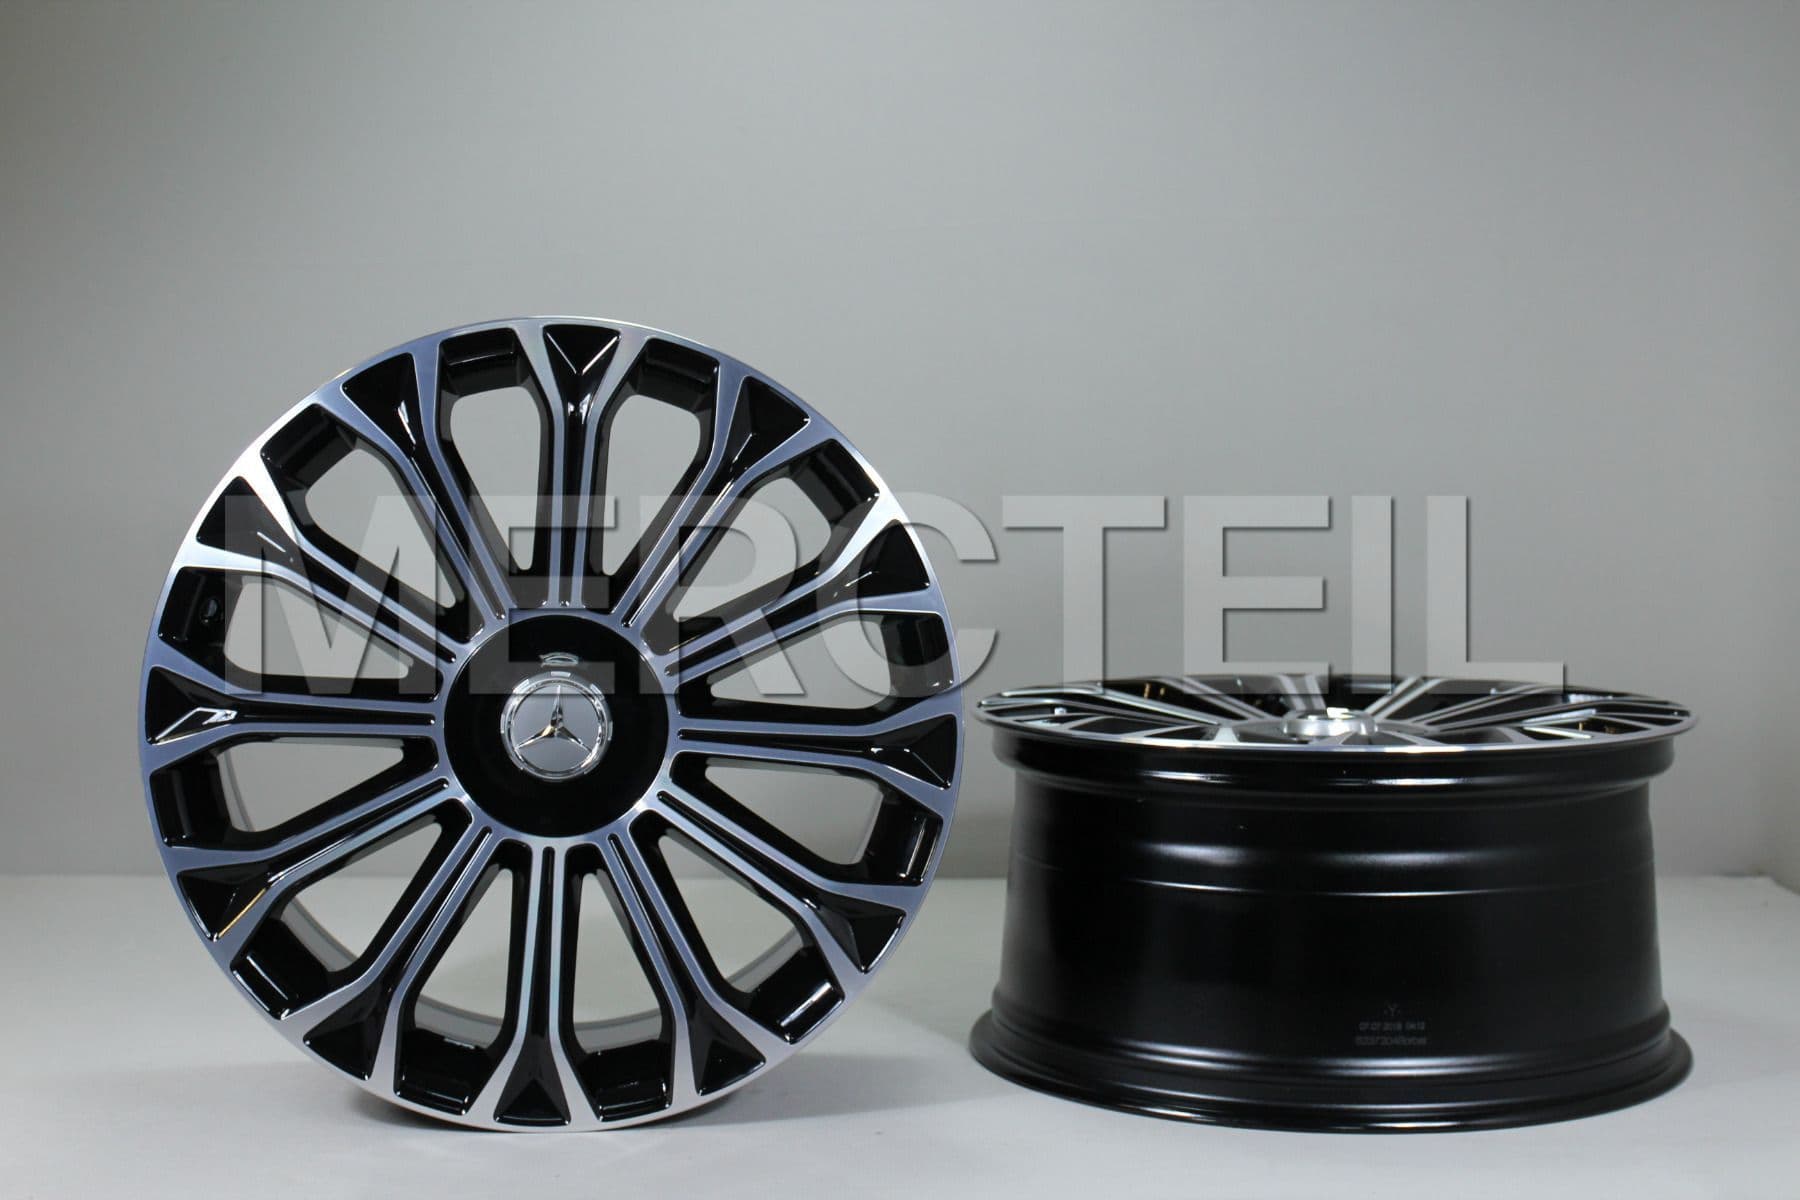 S Class 12 Spoke Alloy Wheels 20 Inch W222 Genuine Mercedes Benz (part number: A22240159007X23)